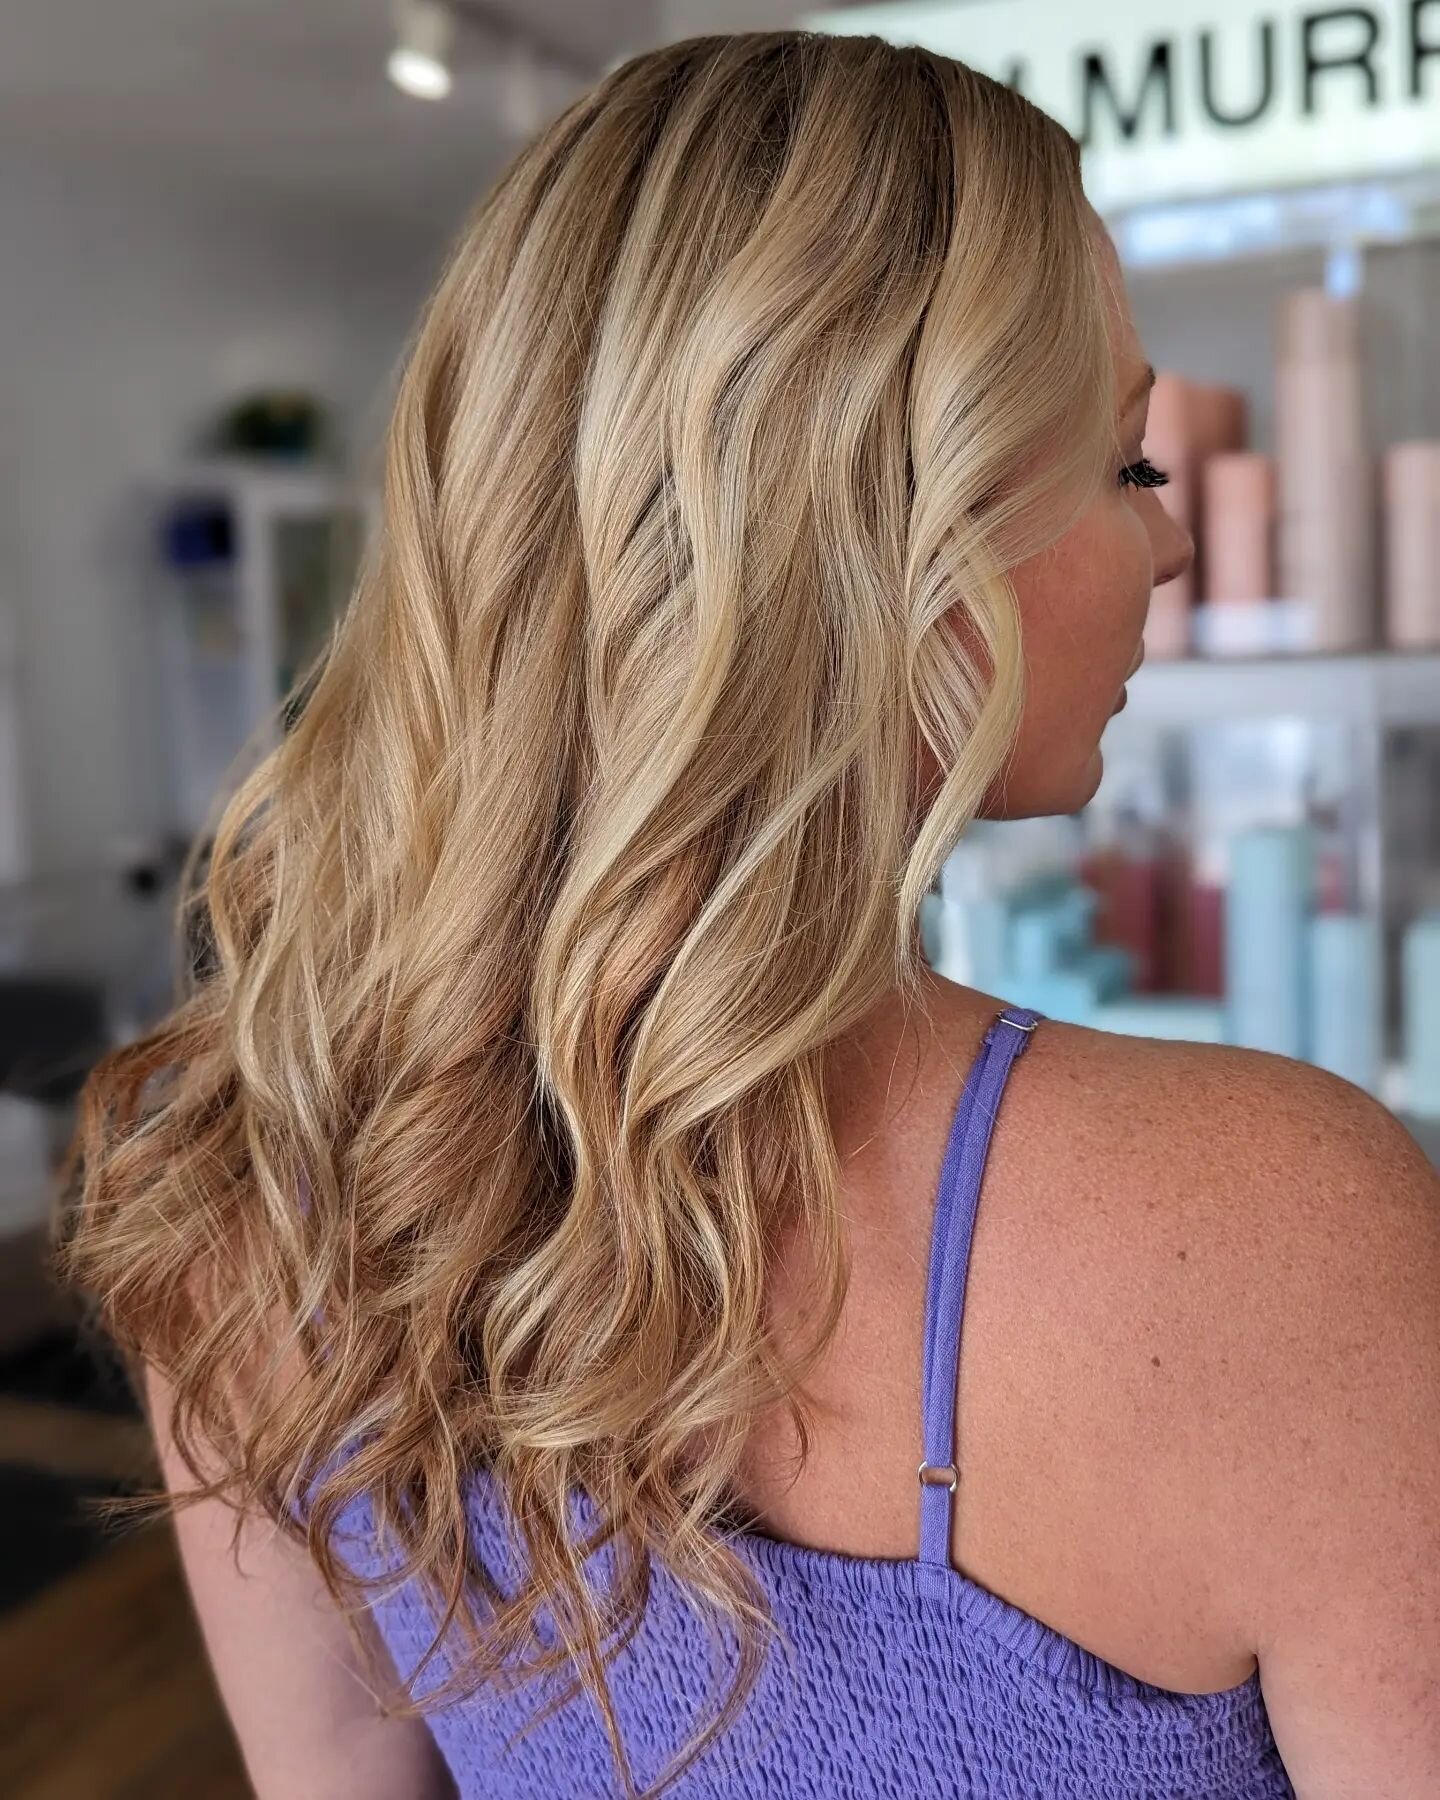 Who doesn't love full, thick and beautiful hair? Maybe she's born with it...maybe it's extensions from Birch! Book your extension consultation today for your dream hair in a single appointment.